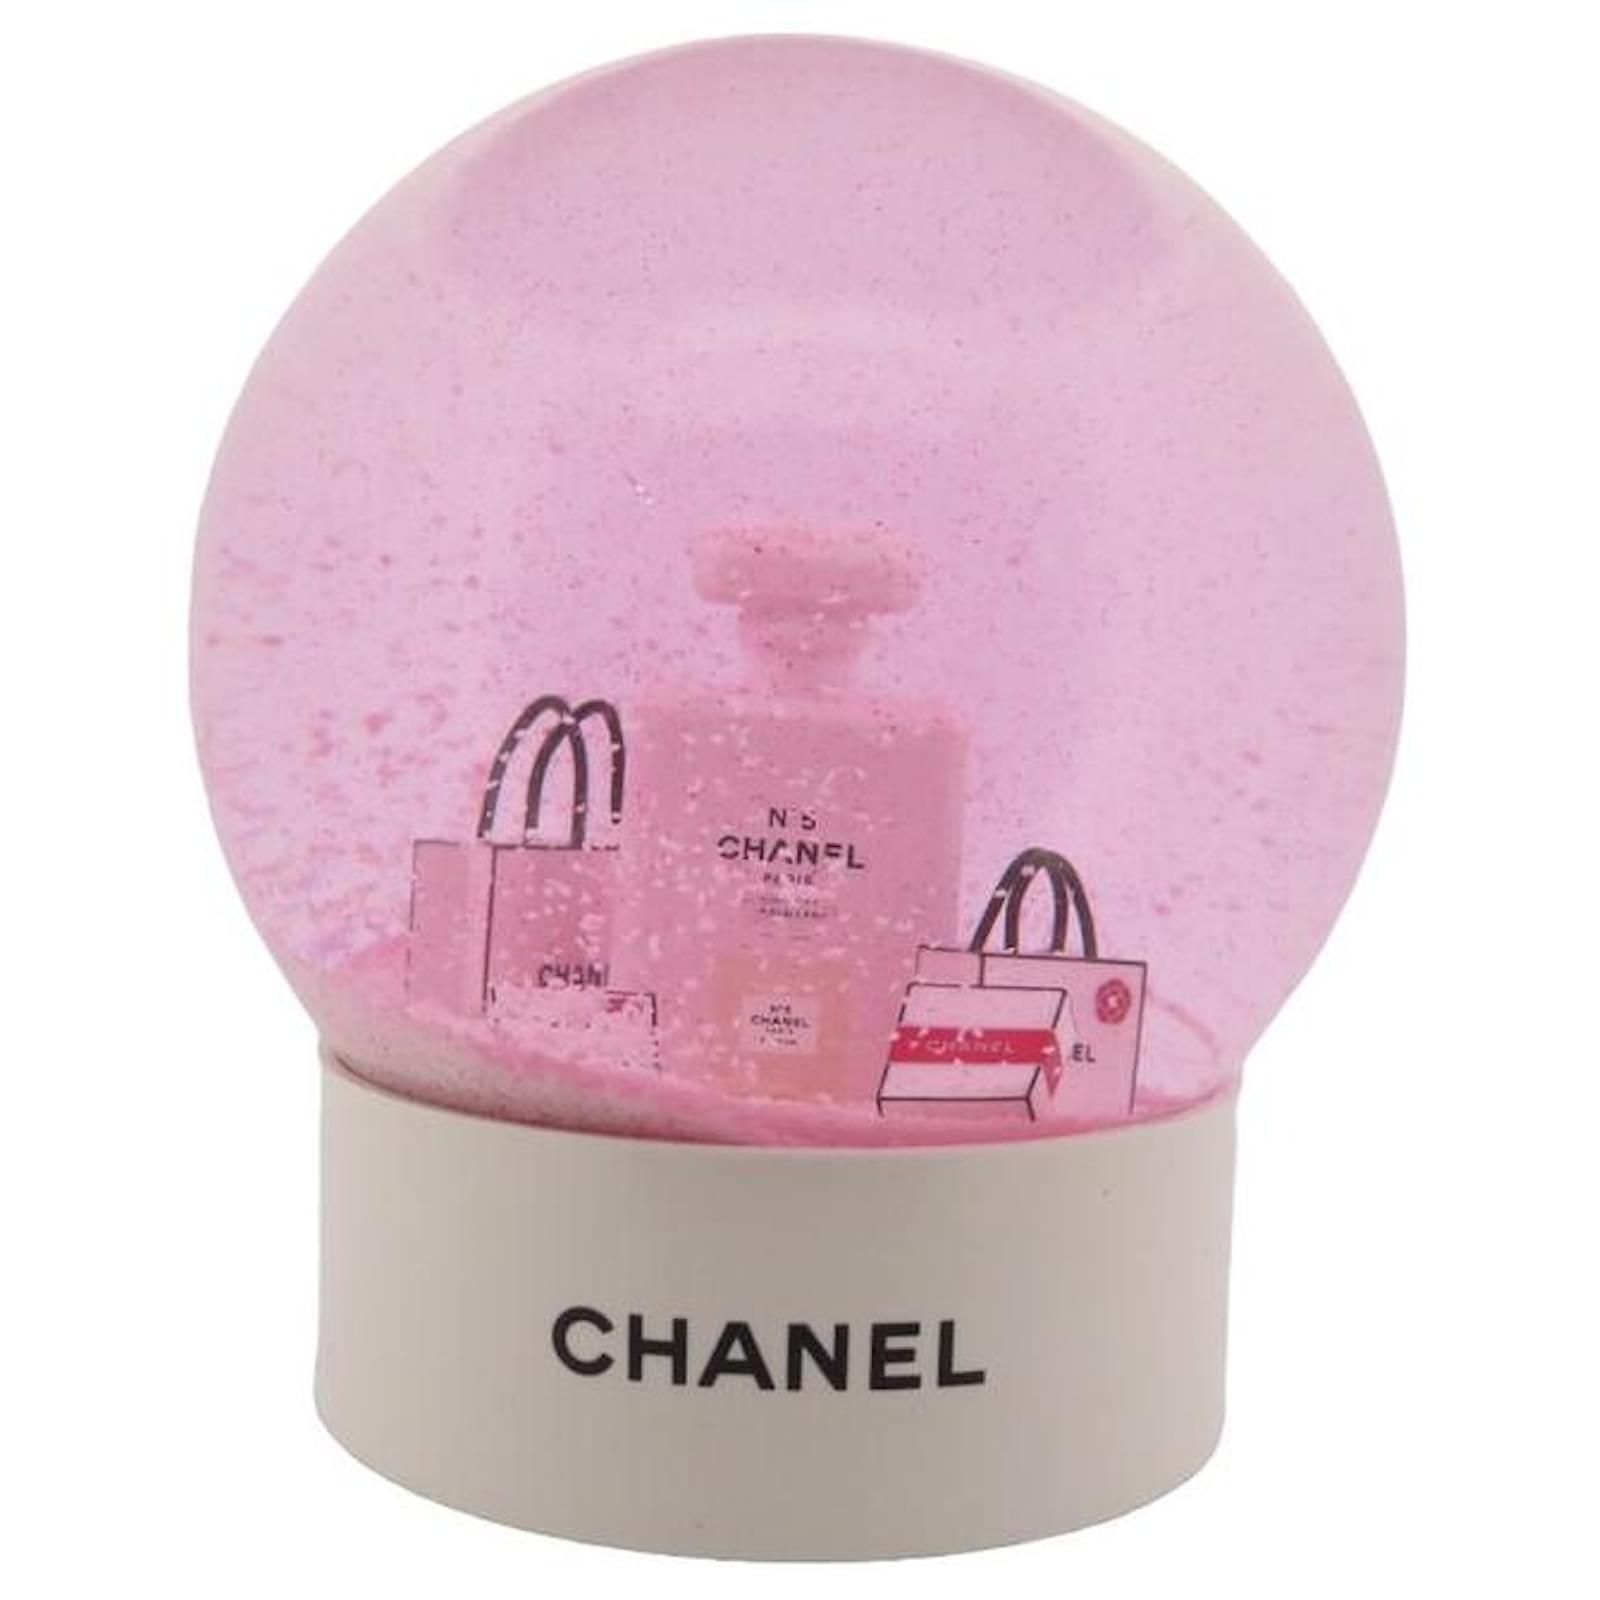 NINE CHANEL PERFUM NUMBER SNOW BALL 5 GLASS WATER PINK PINK SNOW